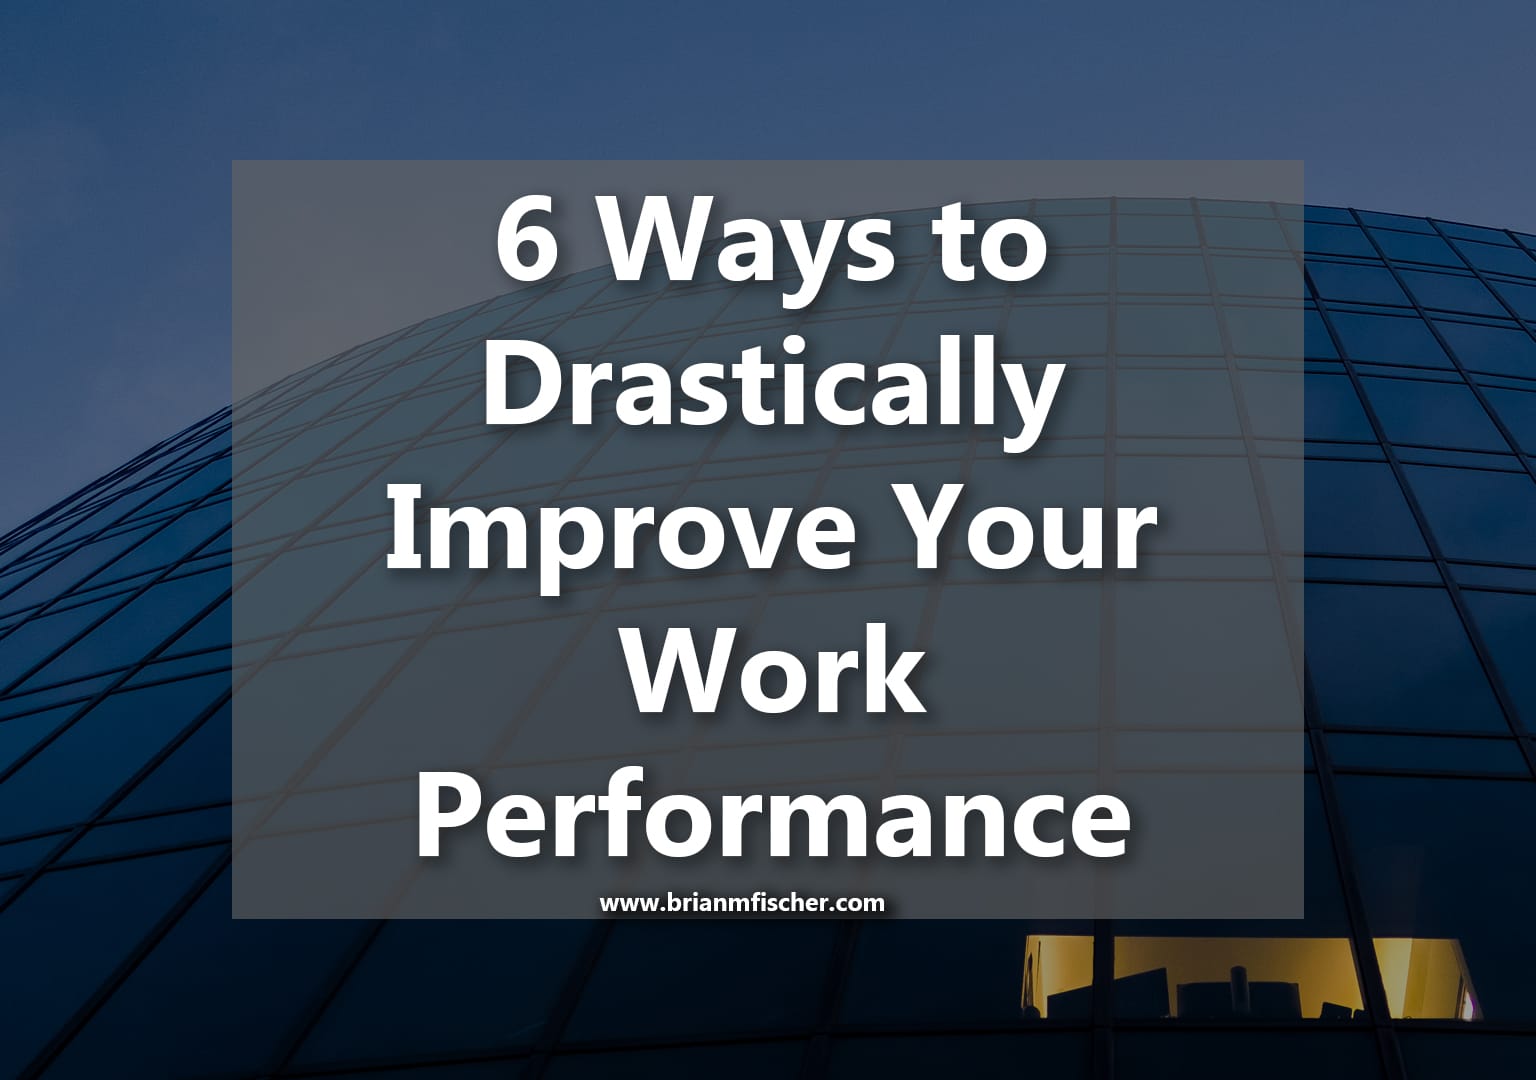 How to improve work performance